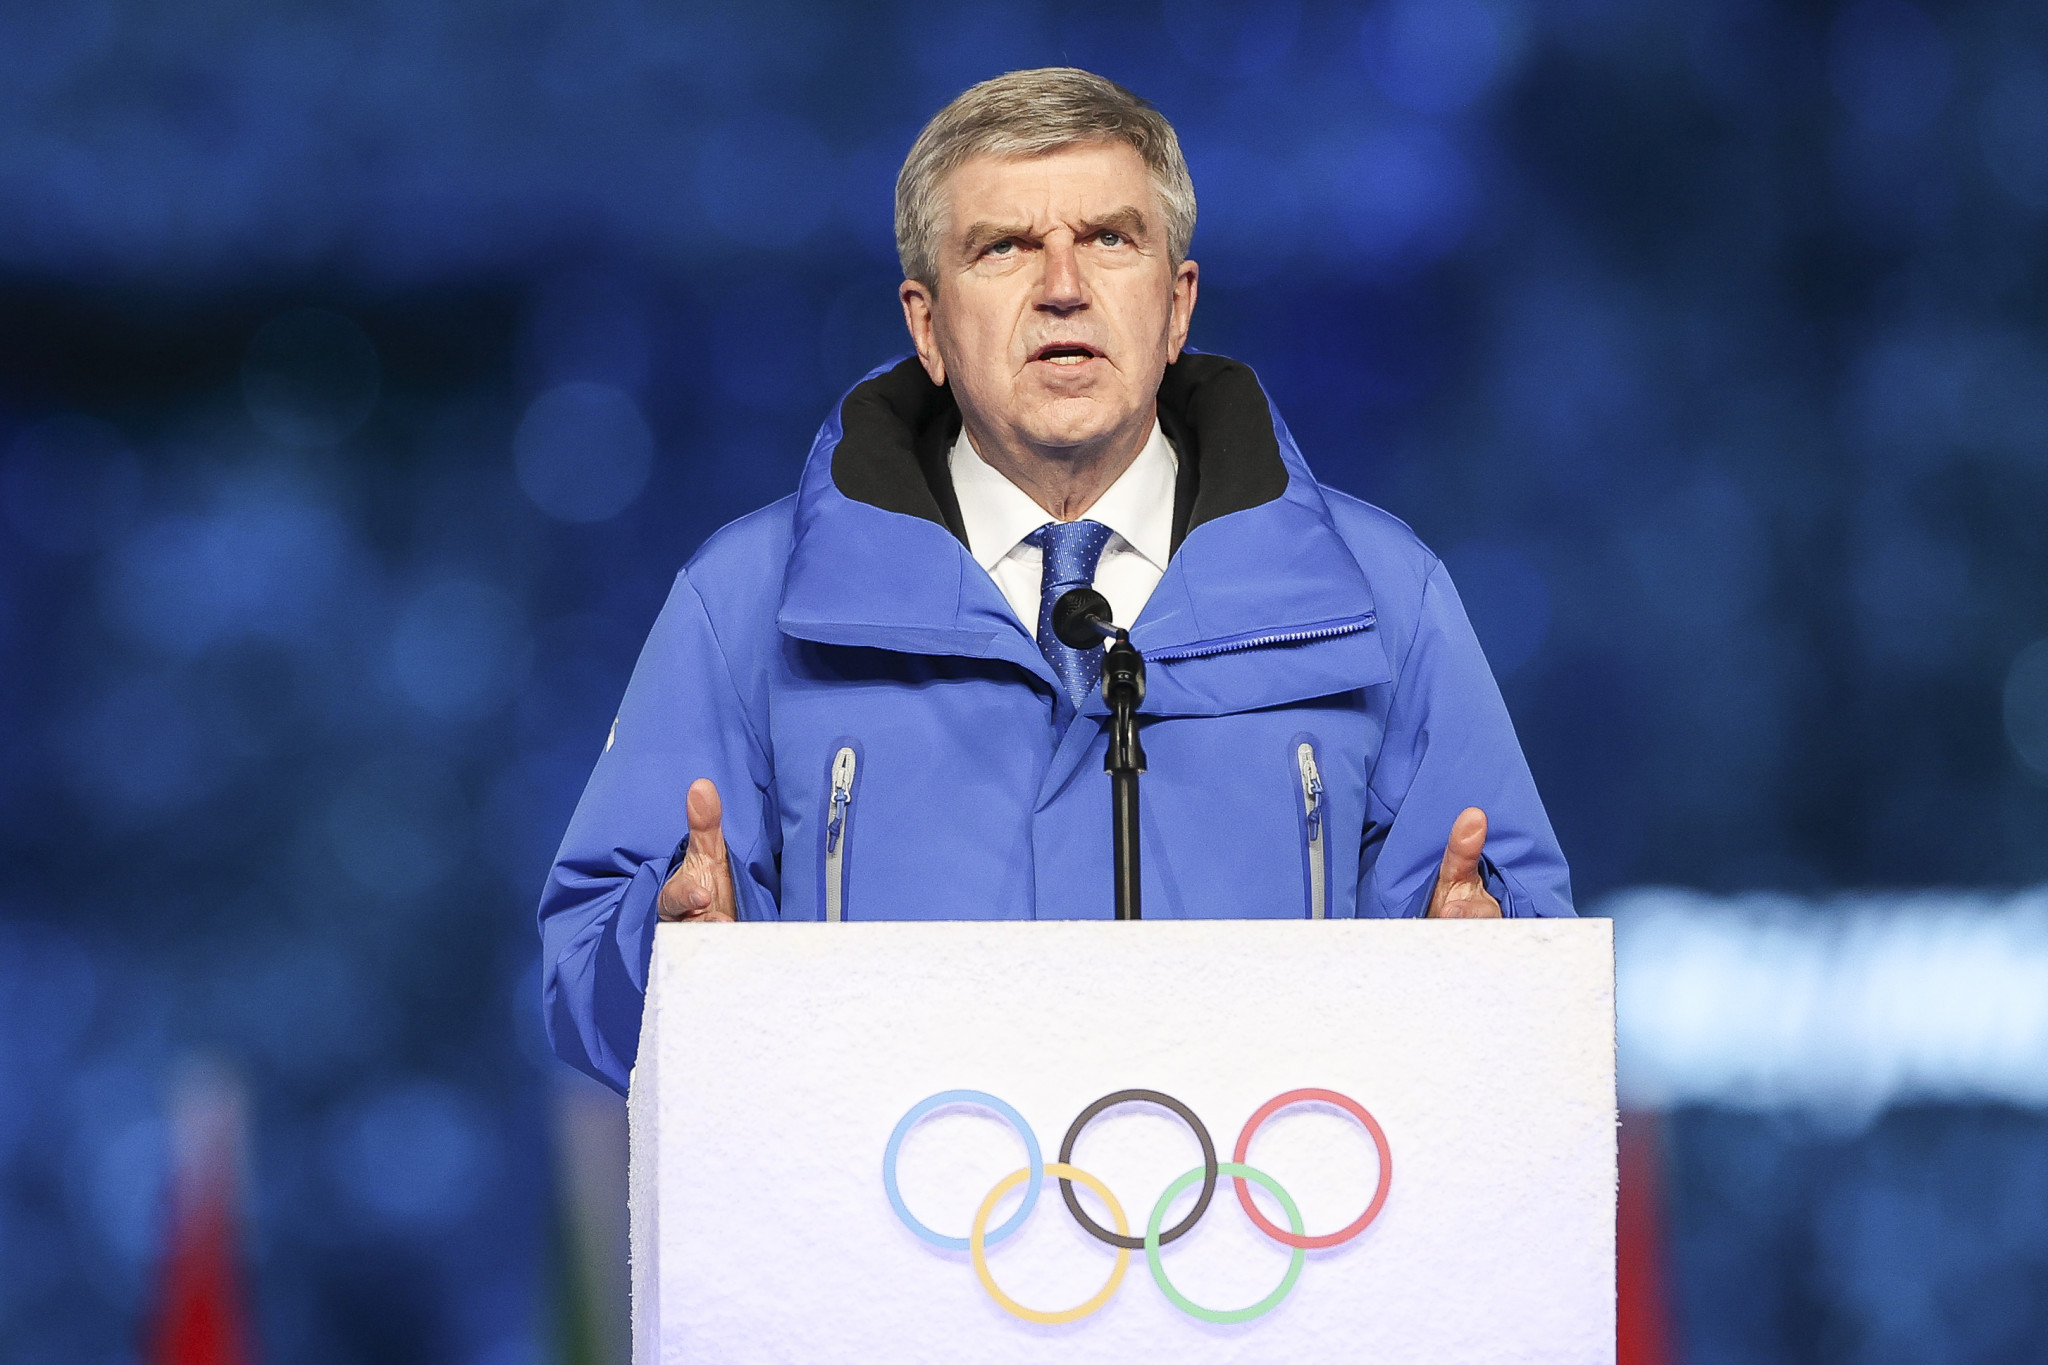 The Olympic bid process and support for Ukrainian athletes were among the topics discussed when IOC President Thomas Bach met with DOSB President Thomas Weikert ©Getty Images